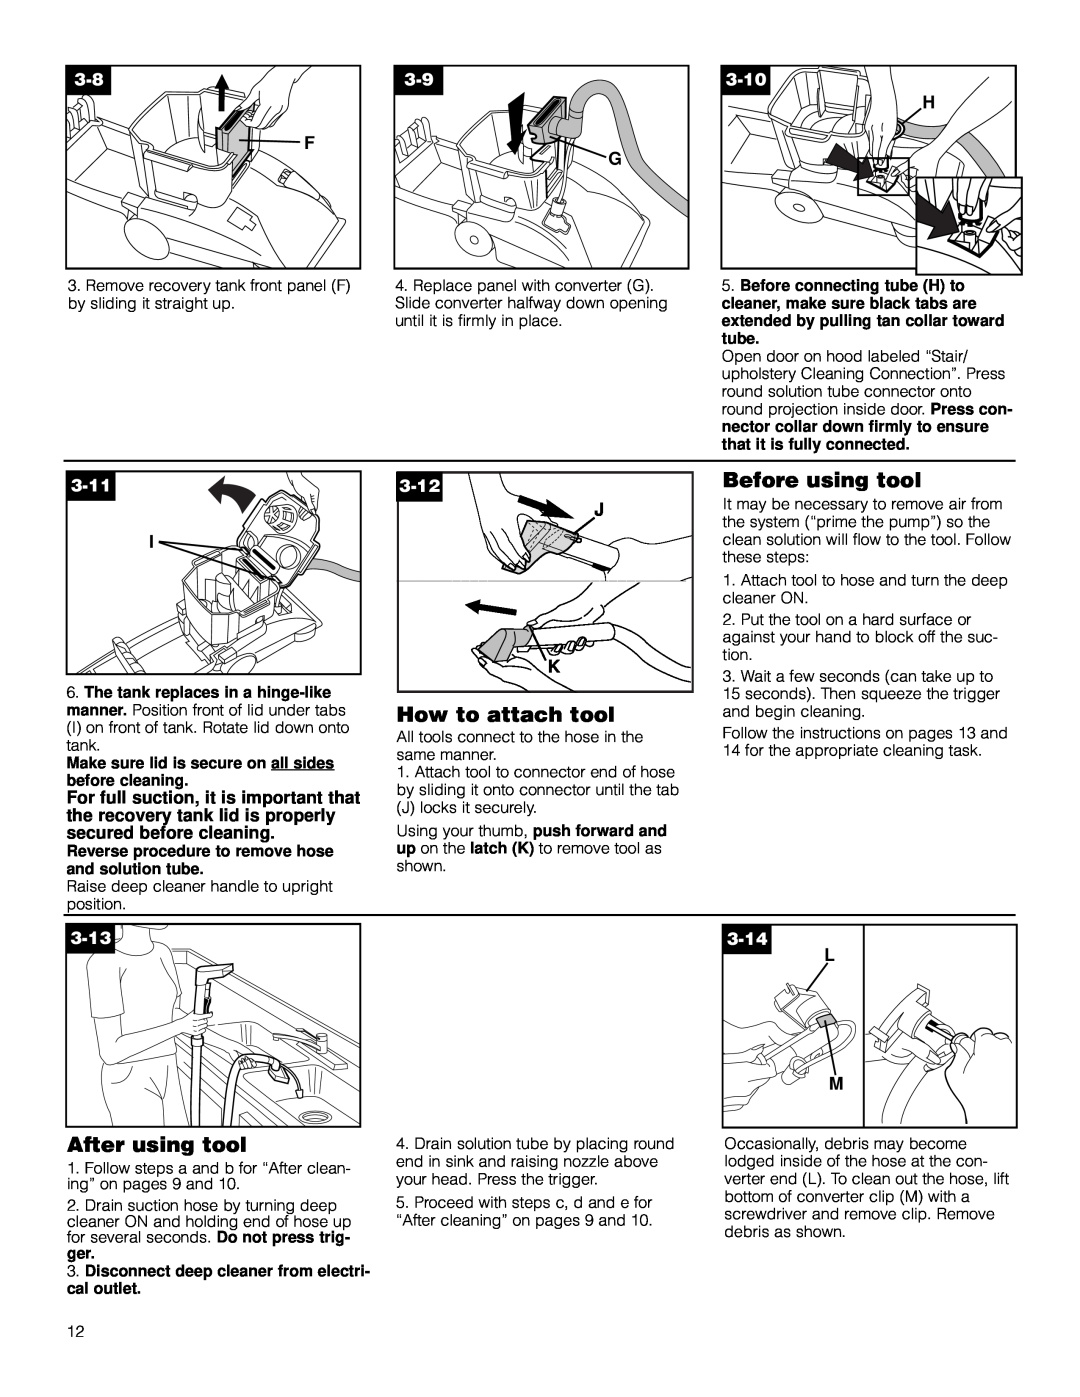 Hoover F5906900 owner manual 3-10, 3-11, 3-12, 3-13, 3-14 